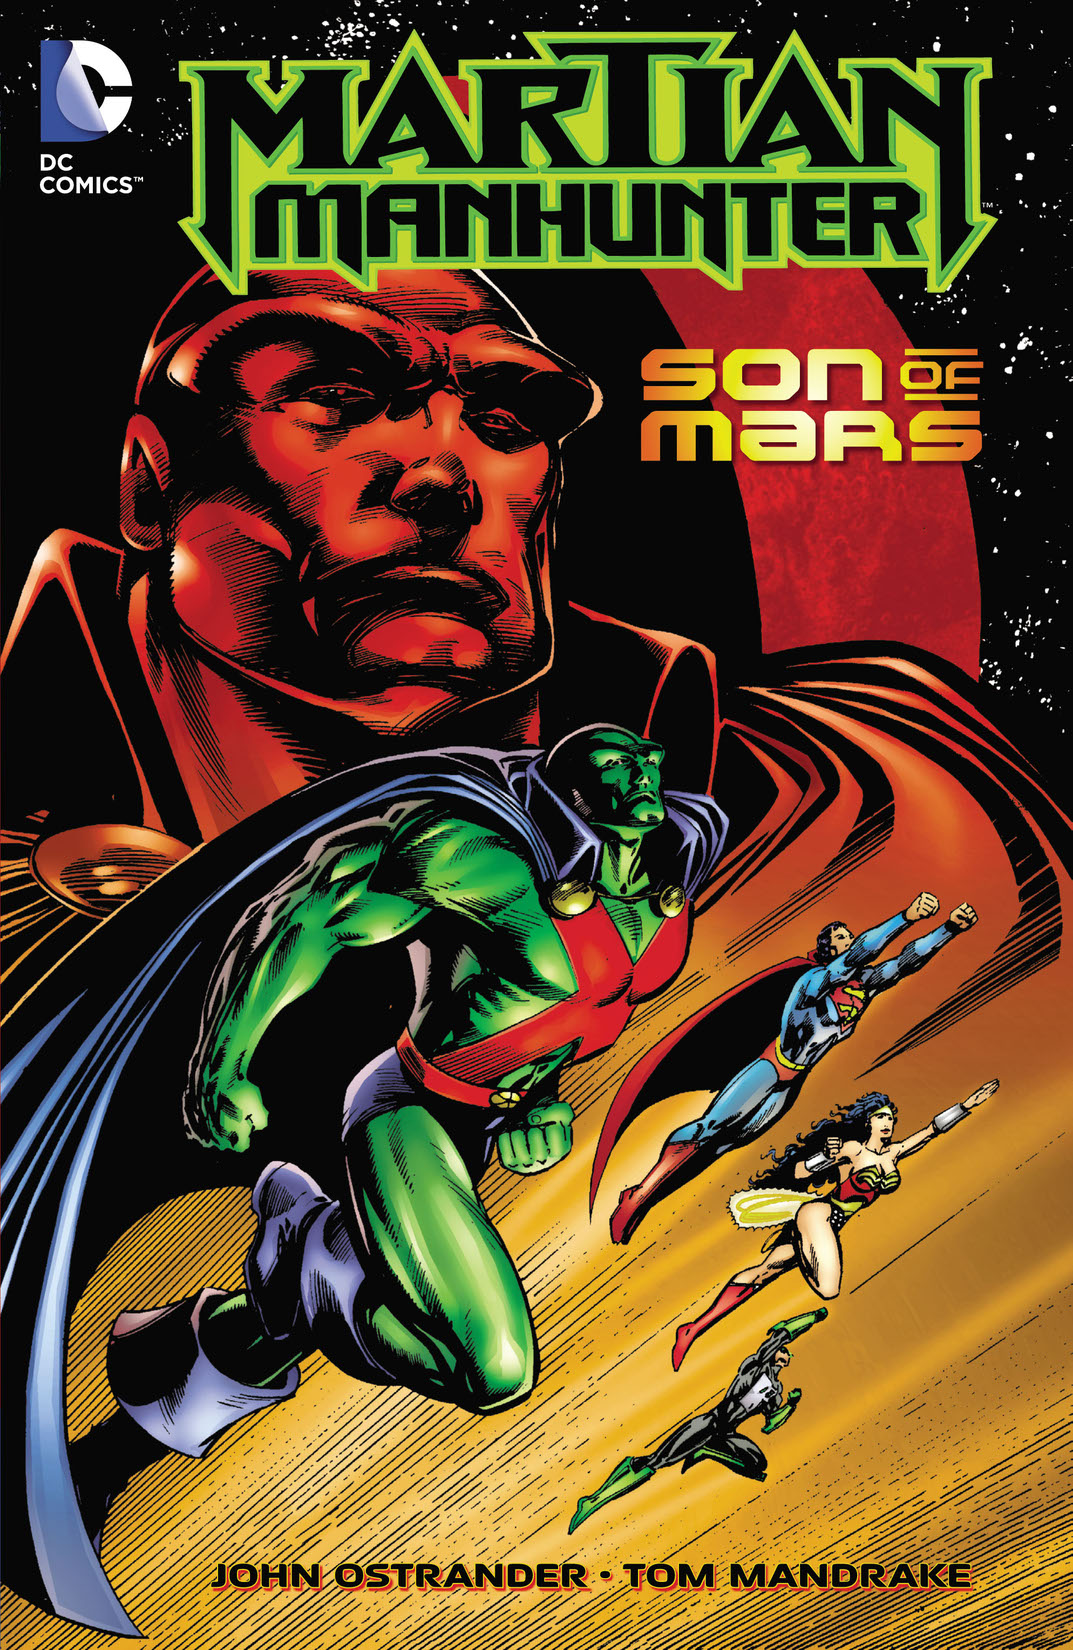 Martian Manhunter: Son of Mars preview images